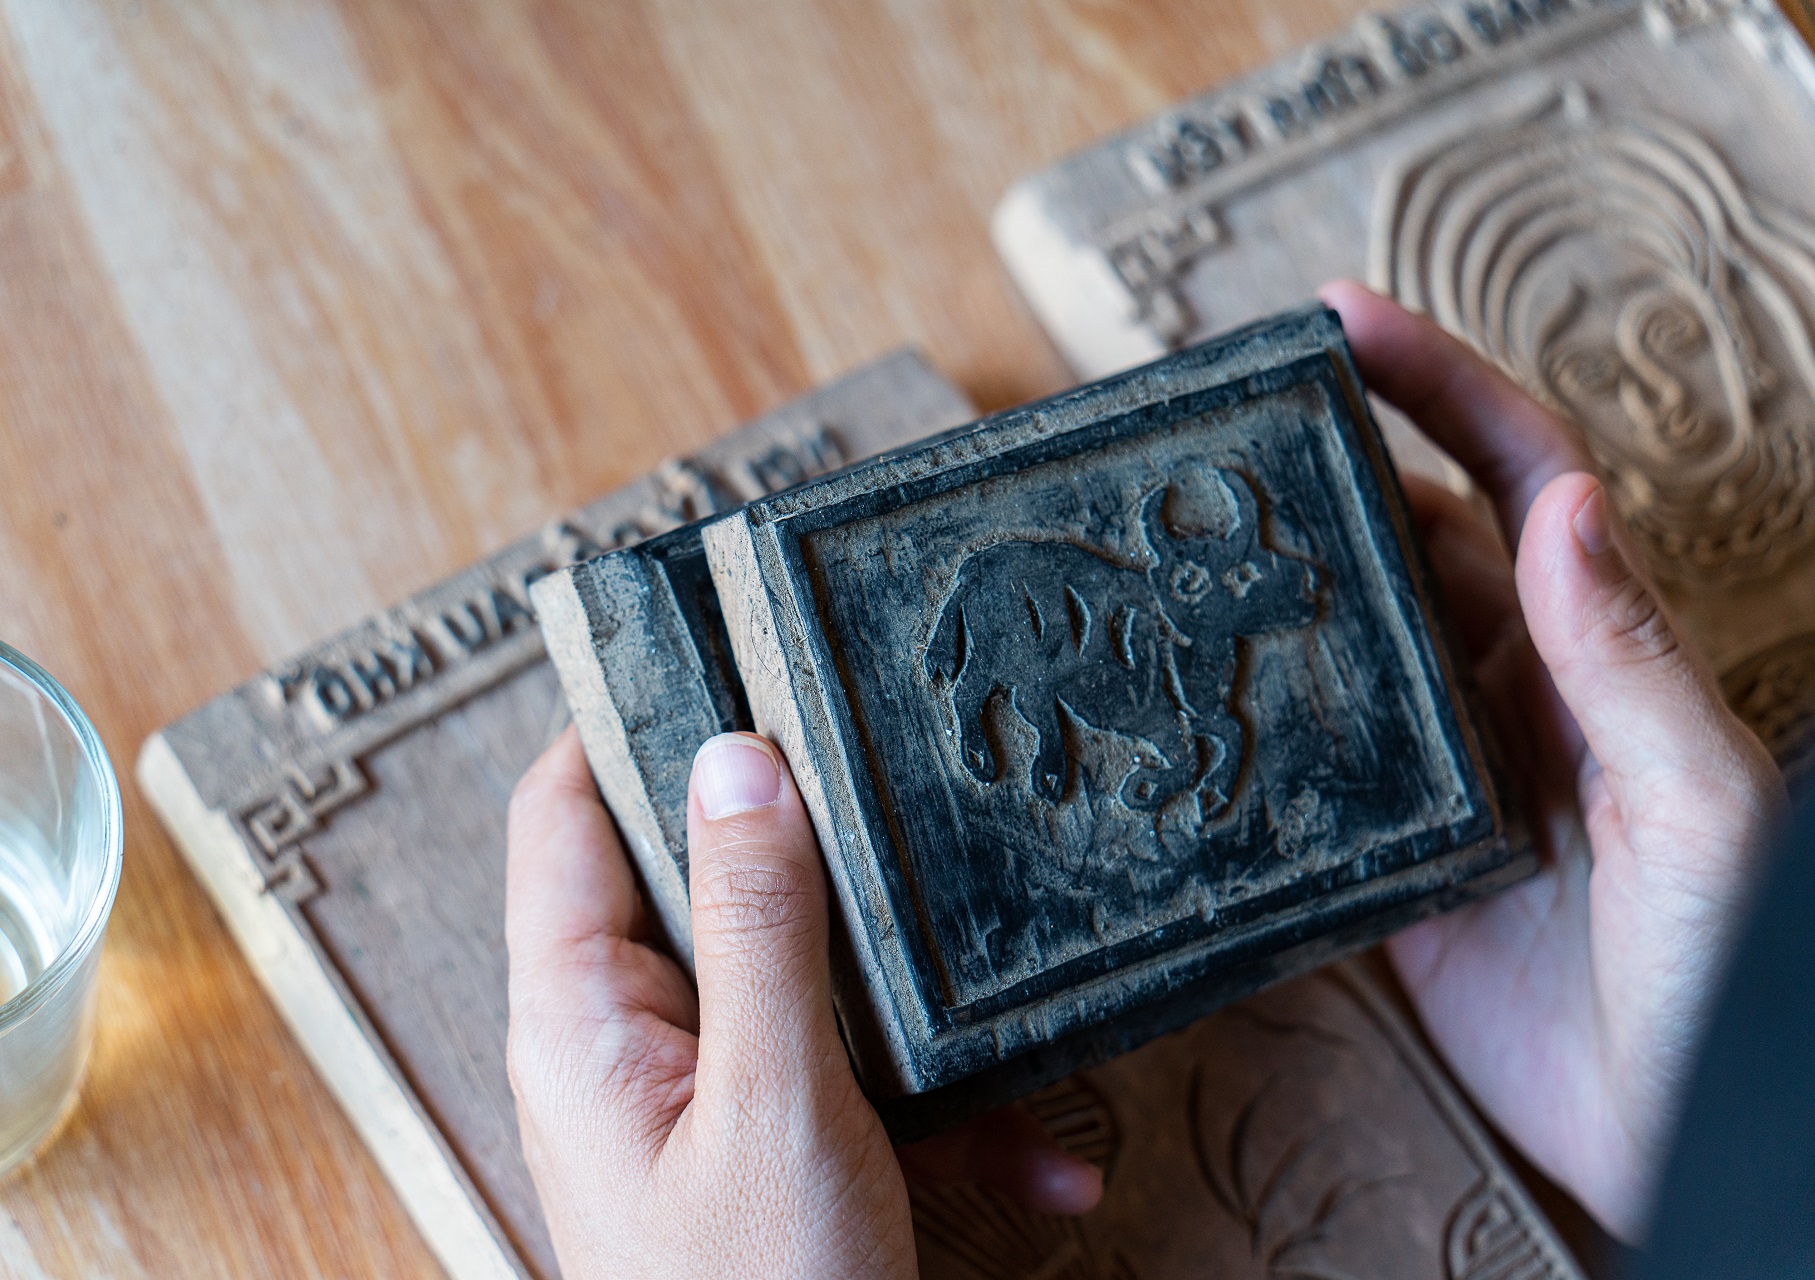 Woodblocks seem simple but will help create special paintings. Photo: Nguyen Trung Au / Tuoi Tre News